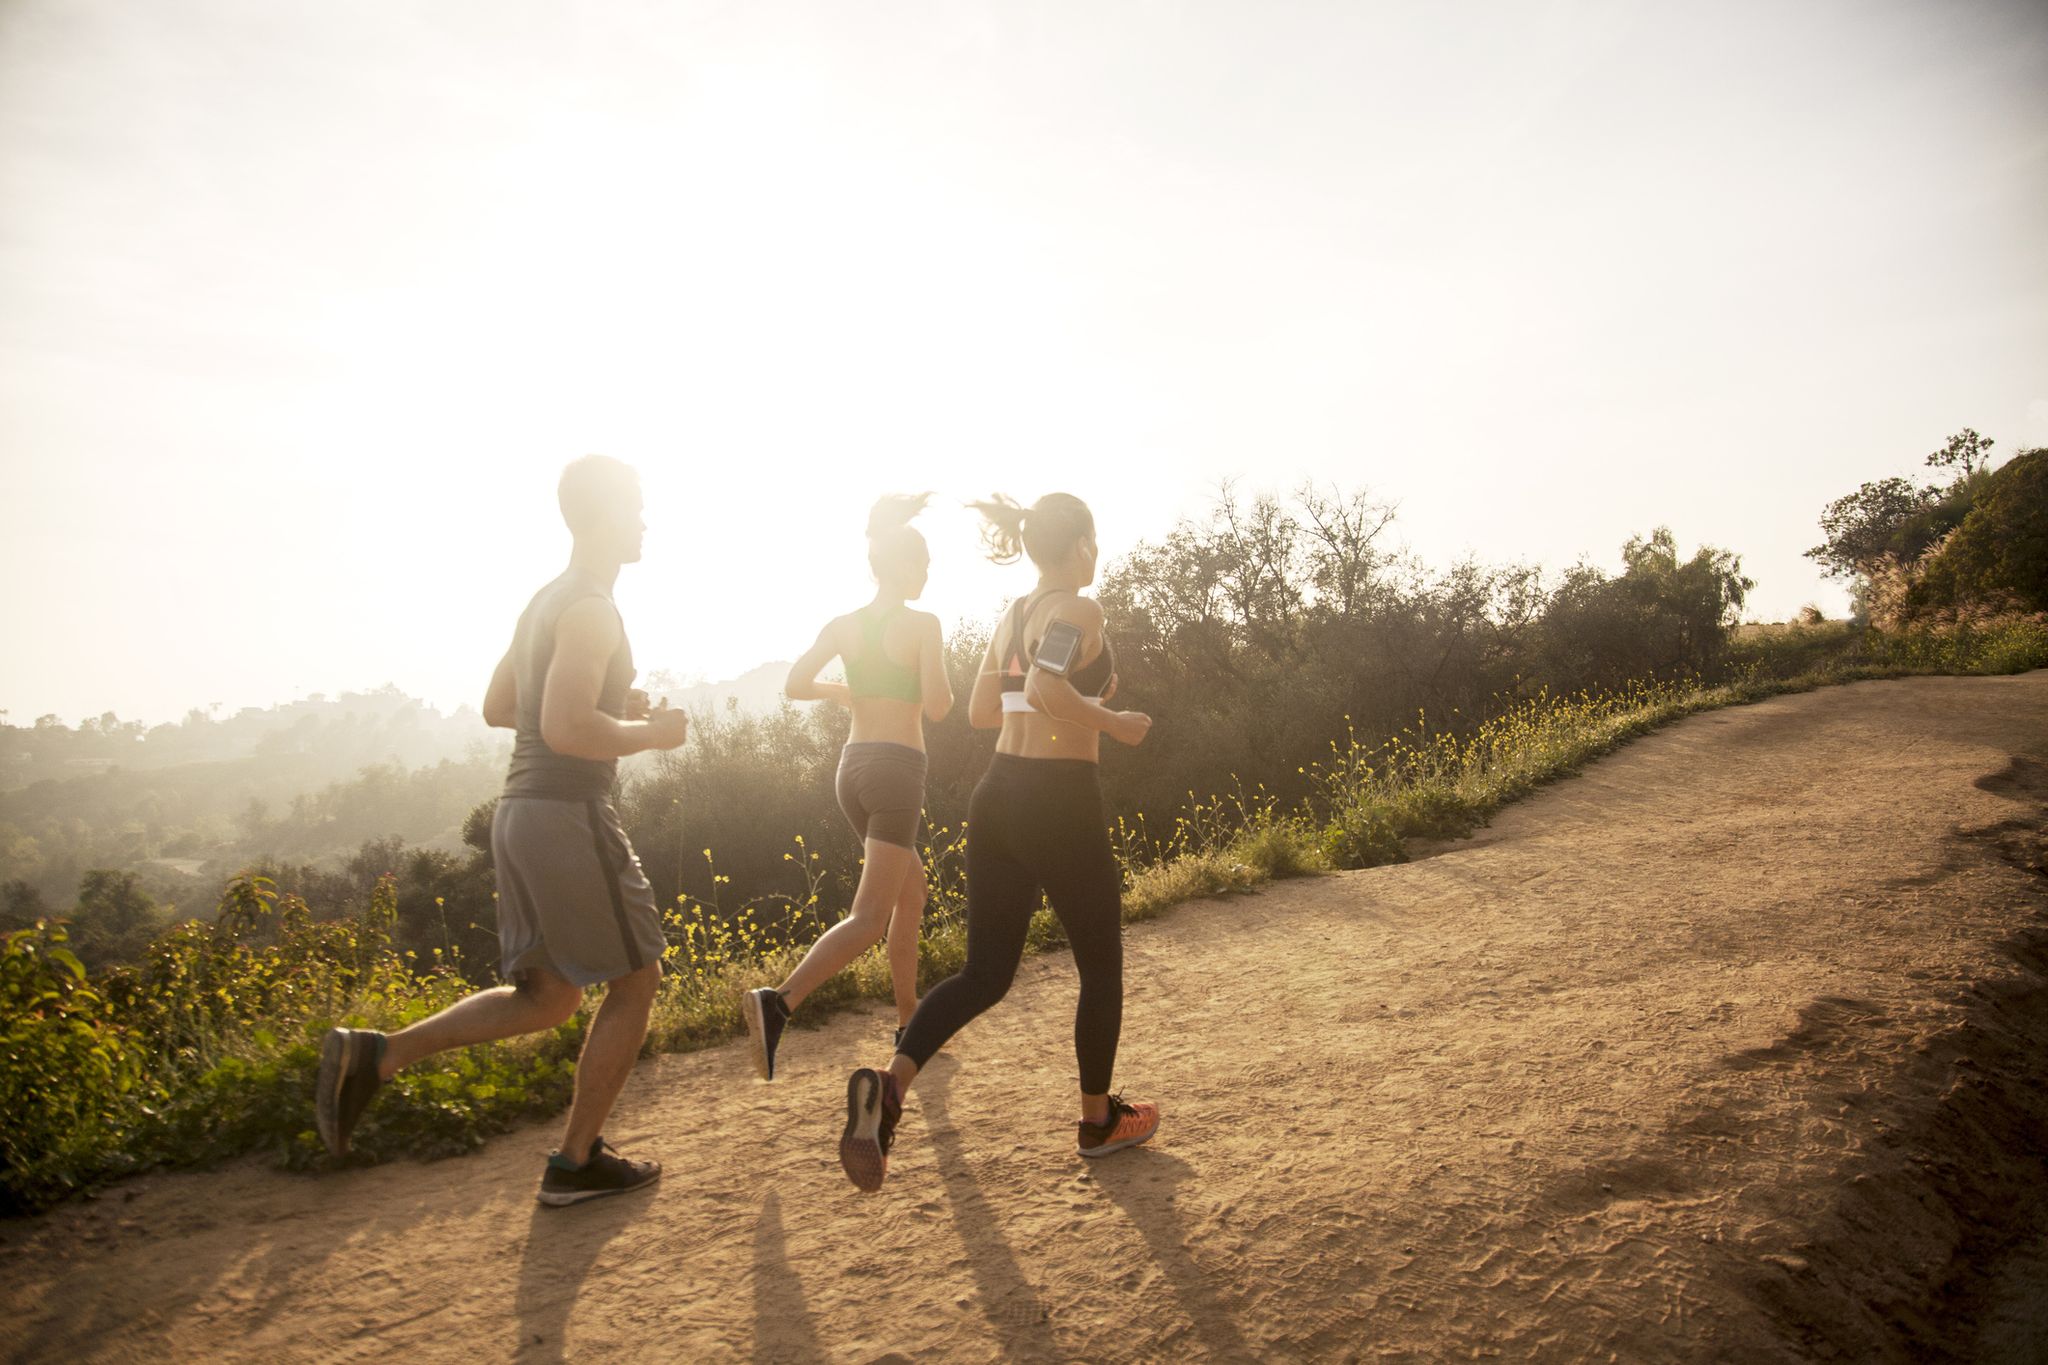 5 Trail Running Workouts to Tackle This Spring